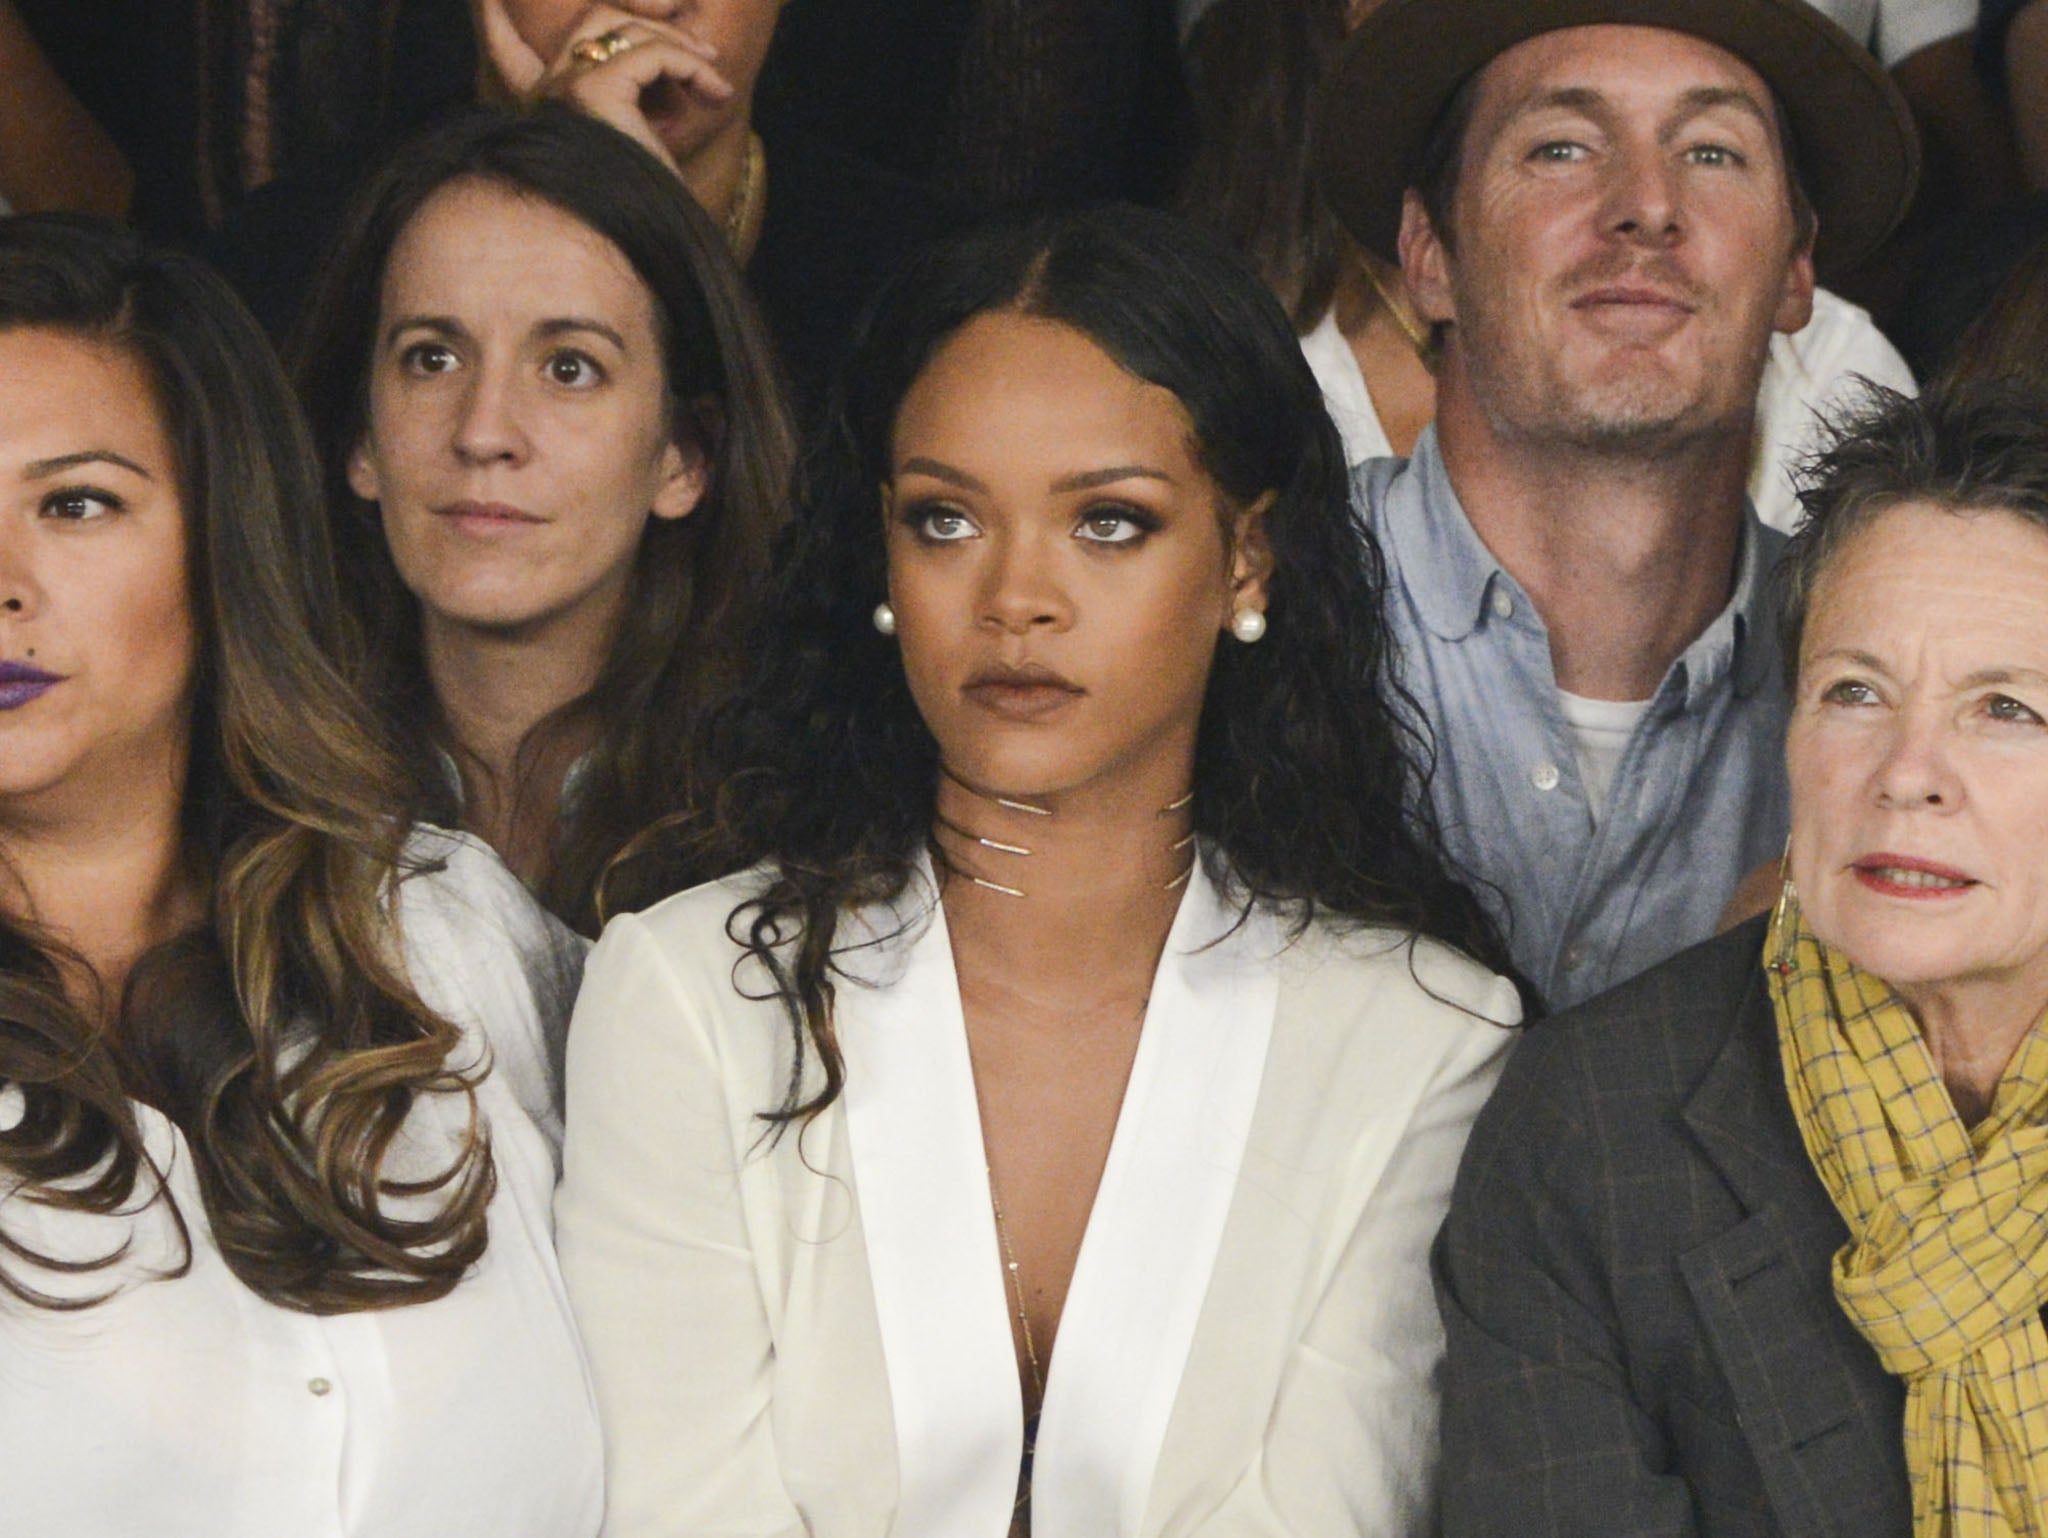 Rihanna attends the Edun fashion show as part of New York Fashion Week in September 2014